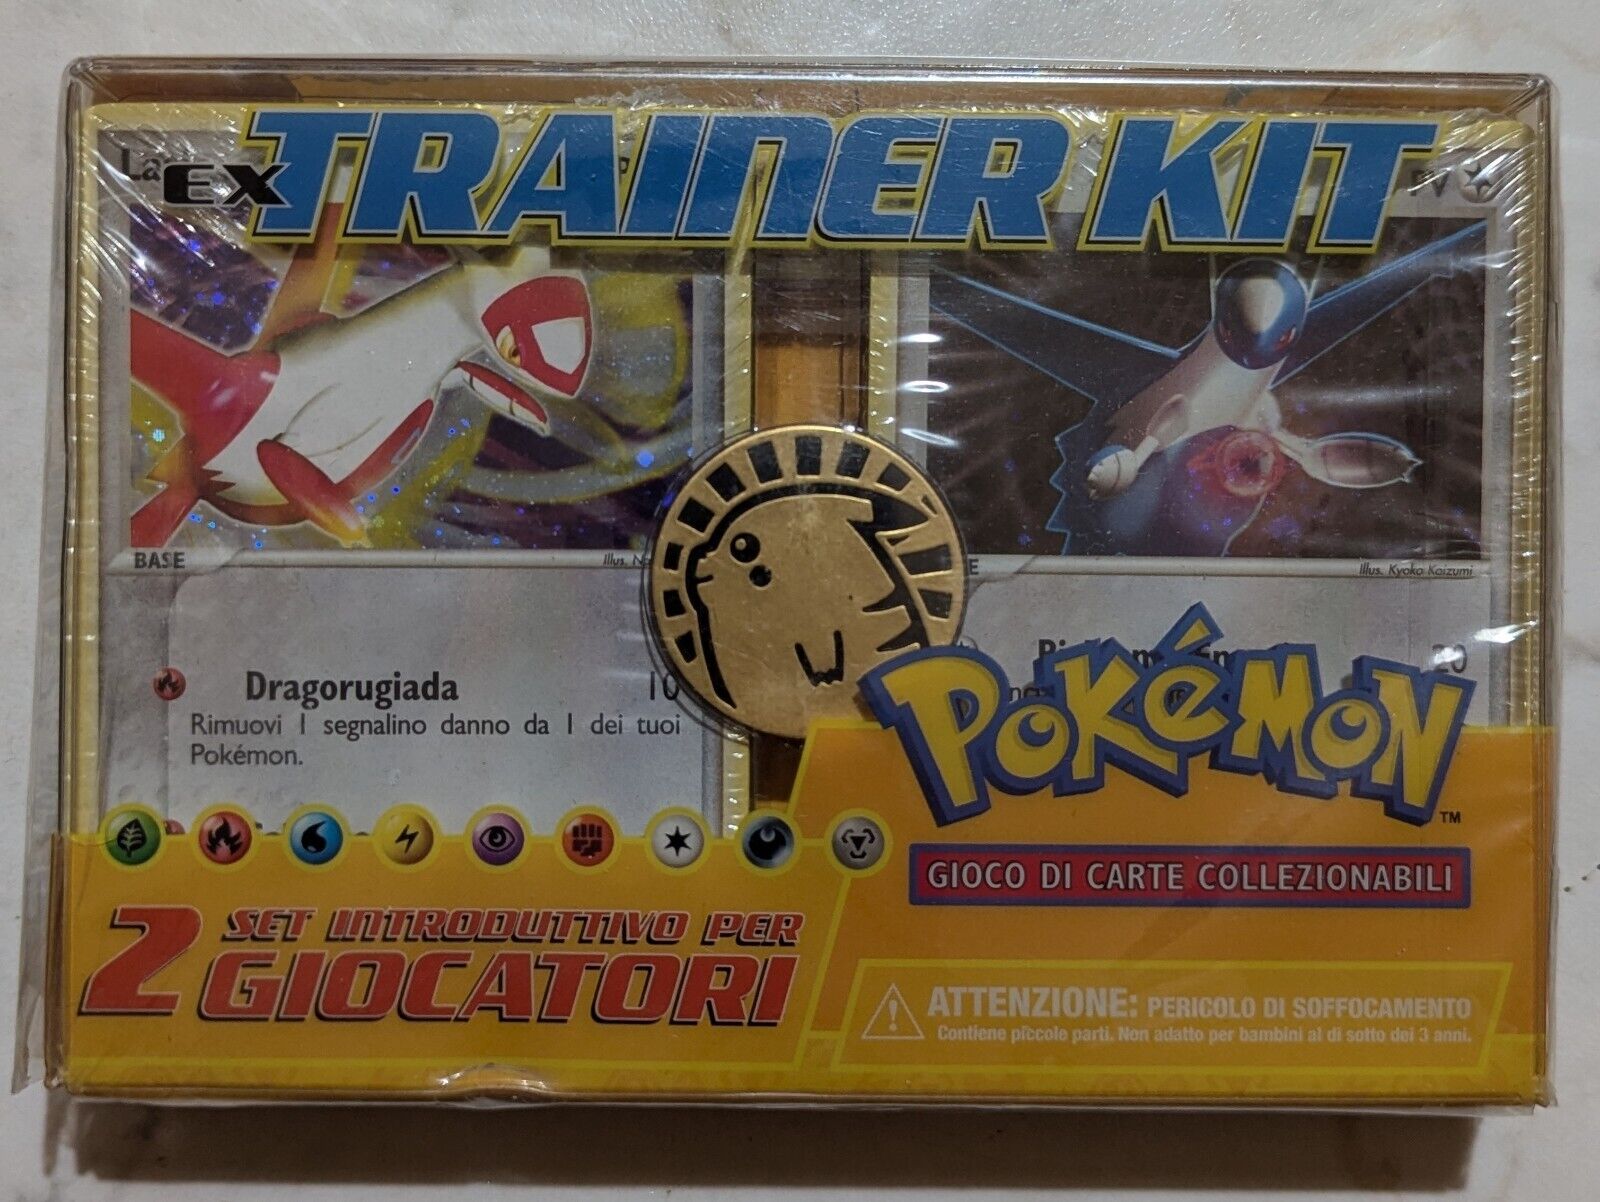 2006 Former Trainer Kit Latias And Latios (Sealed) Received in the Pokemon Day Event